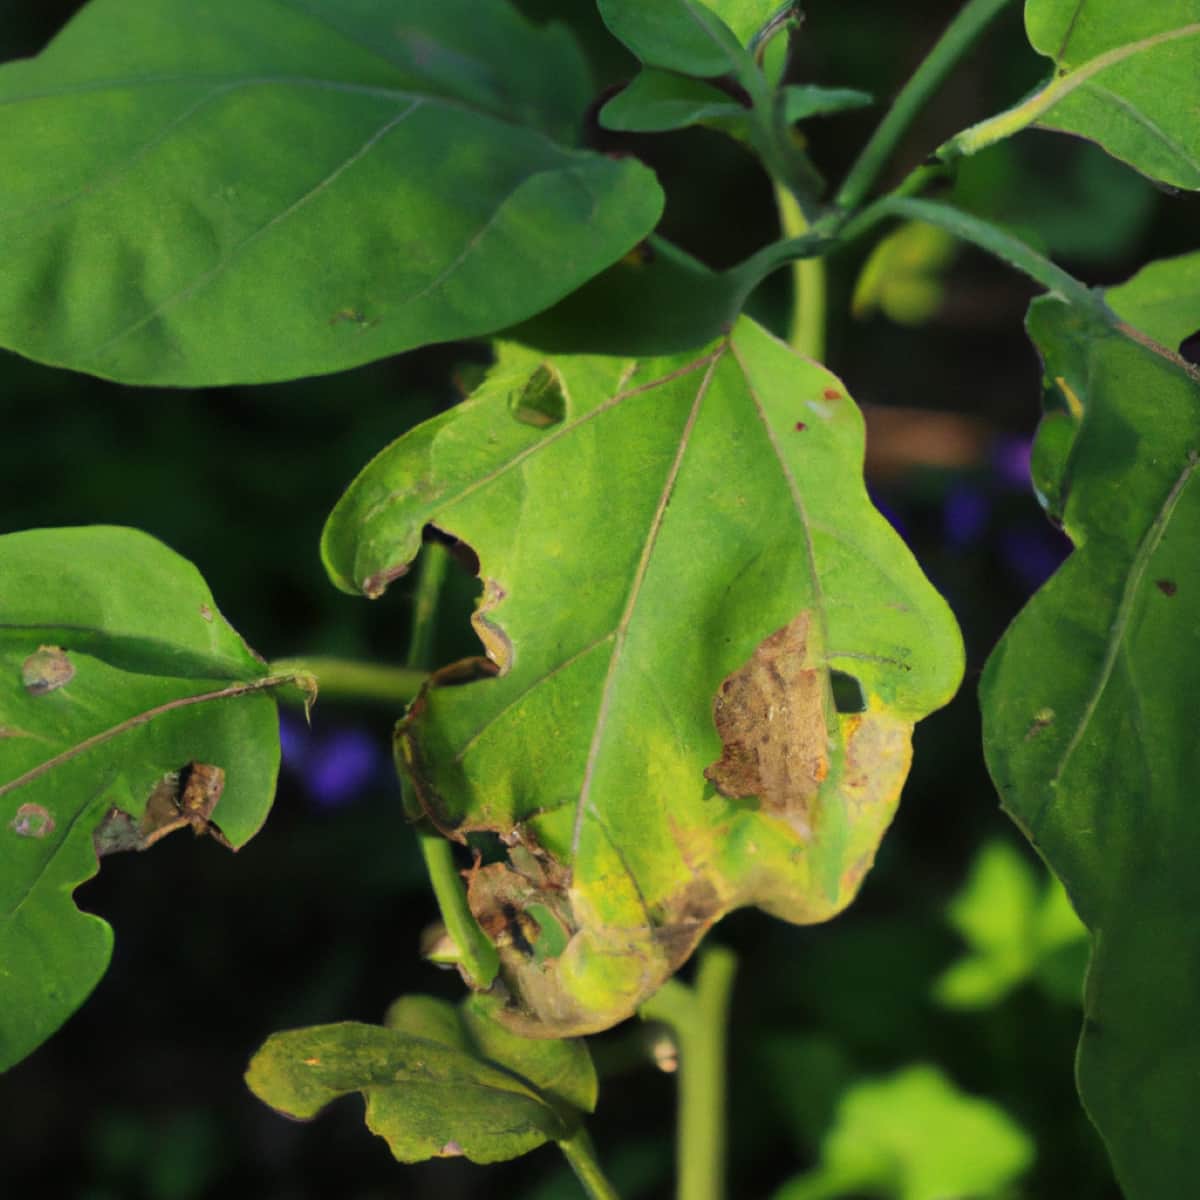 How to Treat Early Blight in Eggplants